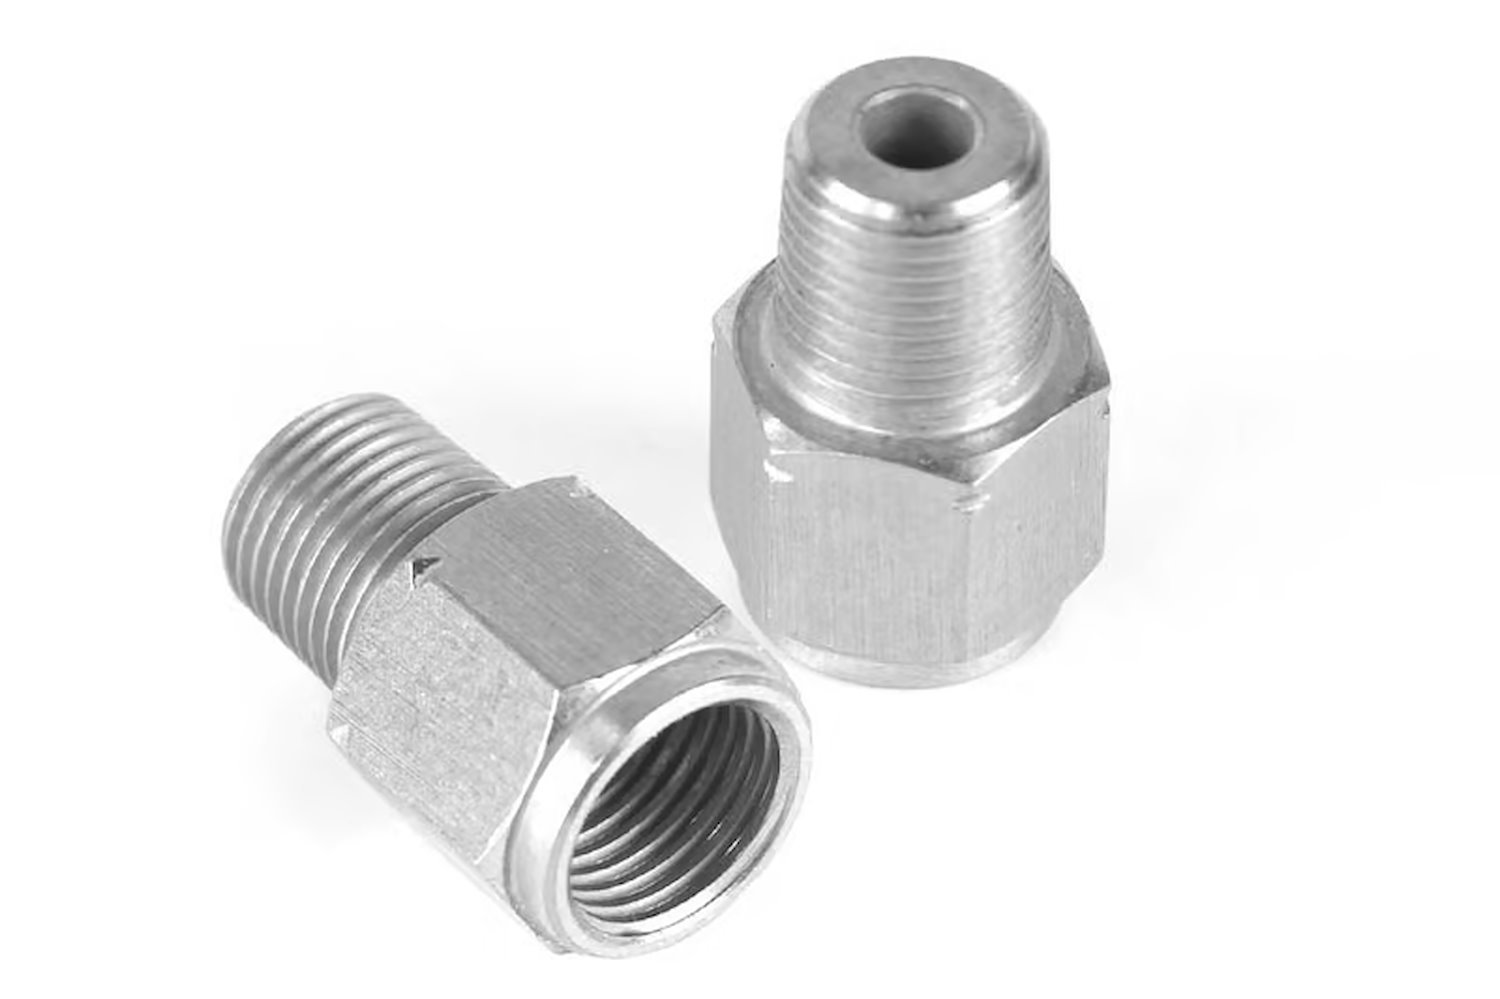 HT-010921 M10 x 1.0 to 1/8 BSPT Adaptor, Stainless Steel